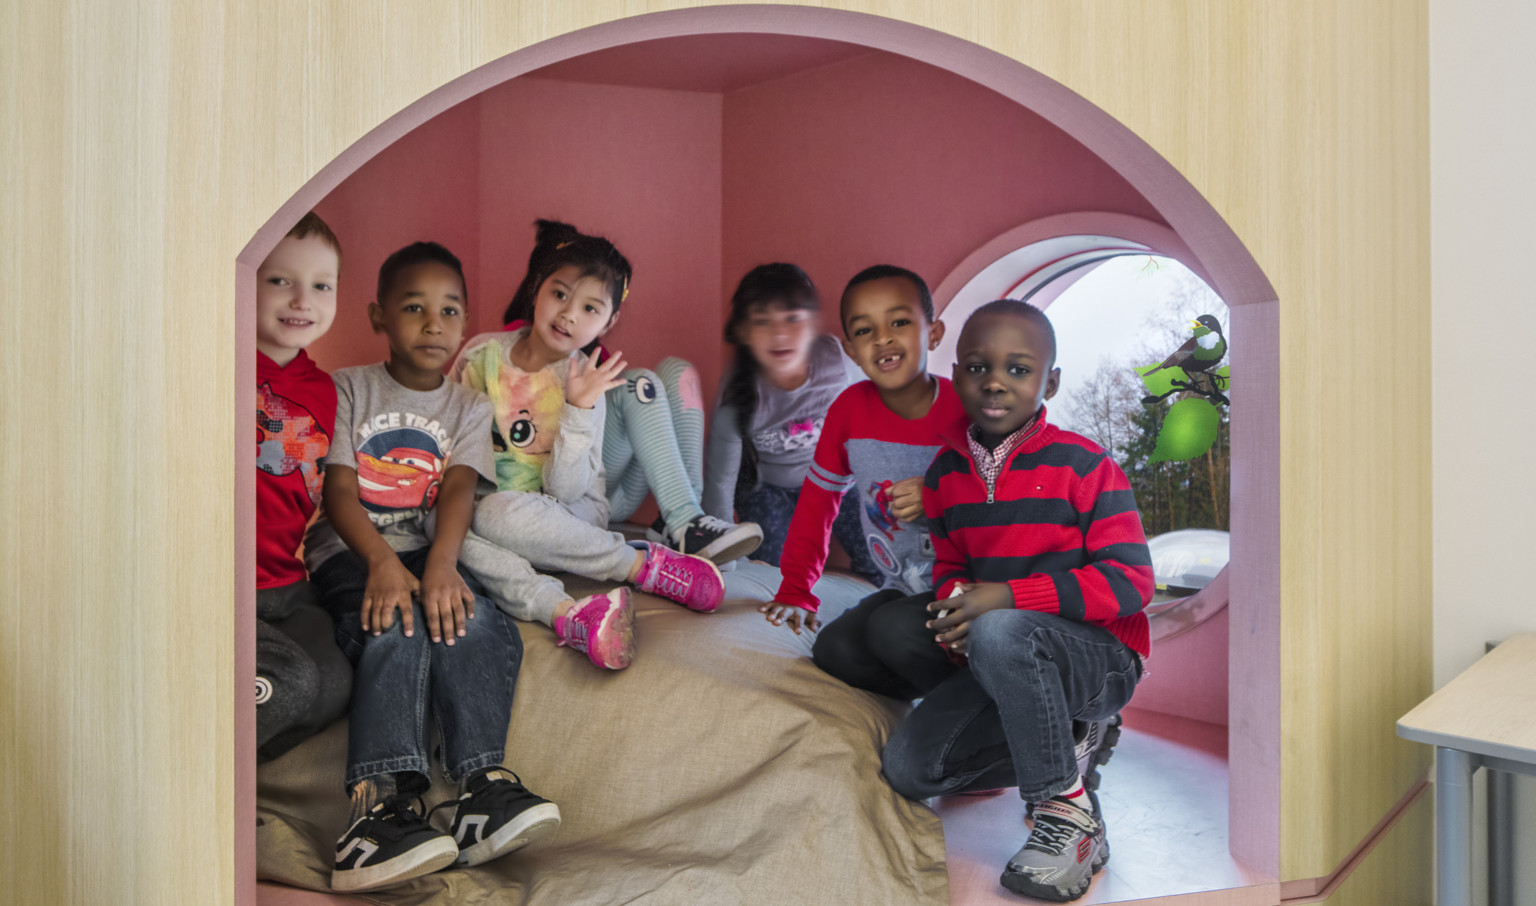 Students gathered in enclosed padded play area with arched small wood doorway